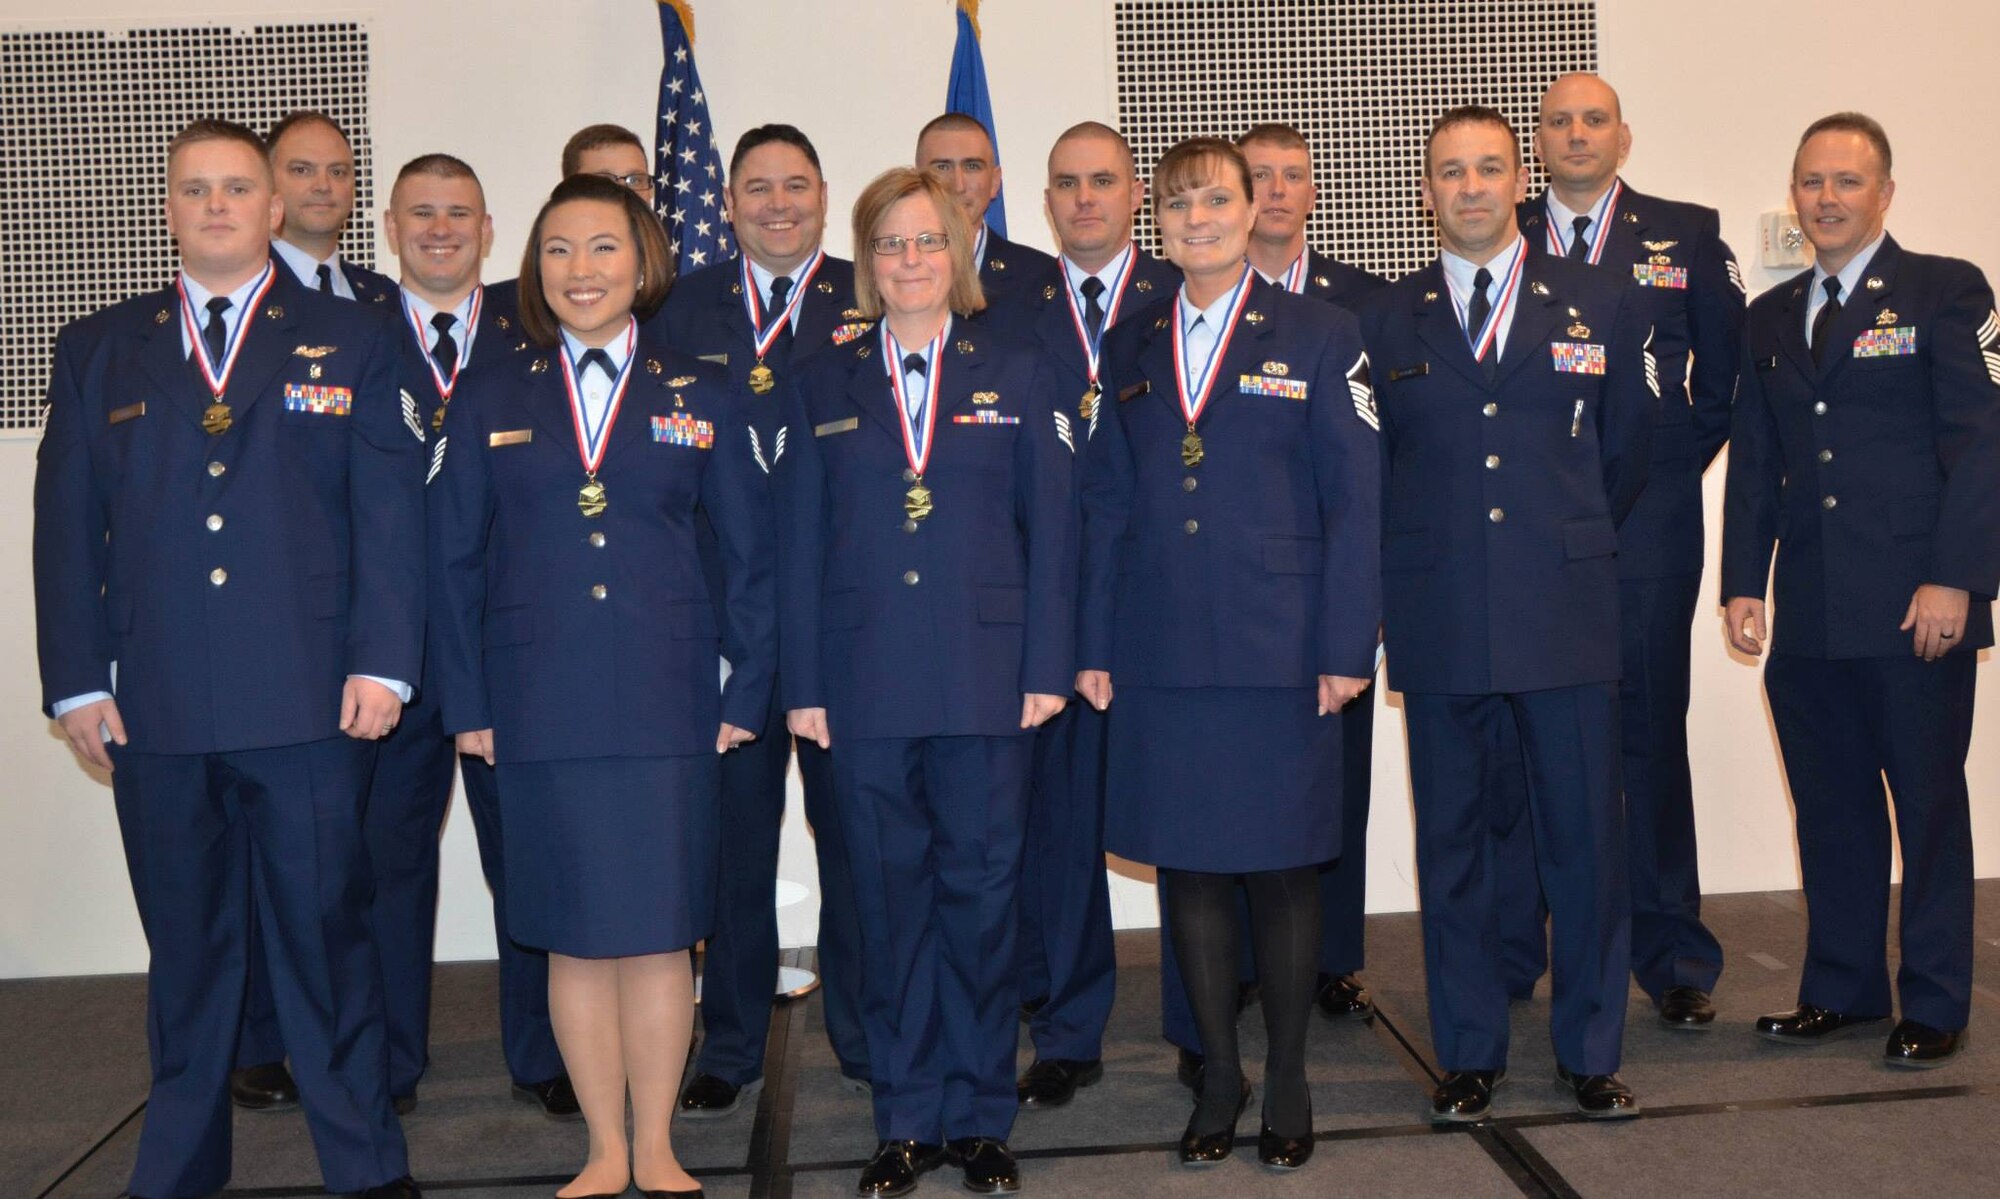 U.S. Air Force Airmen assigned to the 153rd Airlift Wing, Wyoming Air National Guard, pose for a picture prior to the Community College of The Air Force Graduation ceremony May.02, 2015 at  F.E. Warren AFB in Cheyenne, Wyoming. (U.S. Air National Guard photo by Tech. Sgt. John Galvin/released)